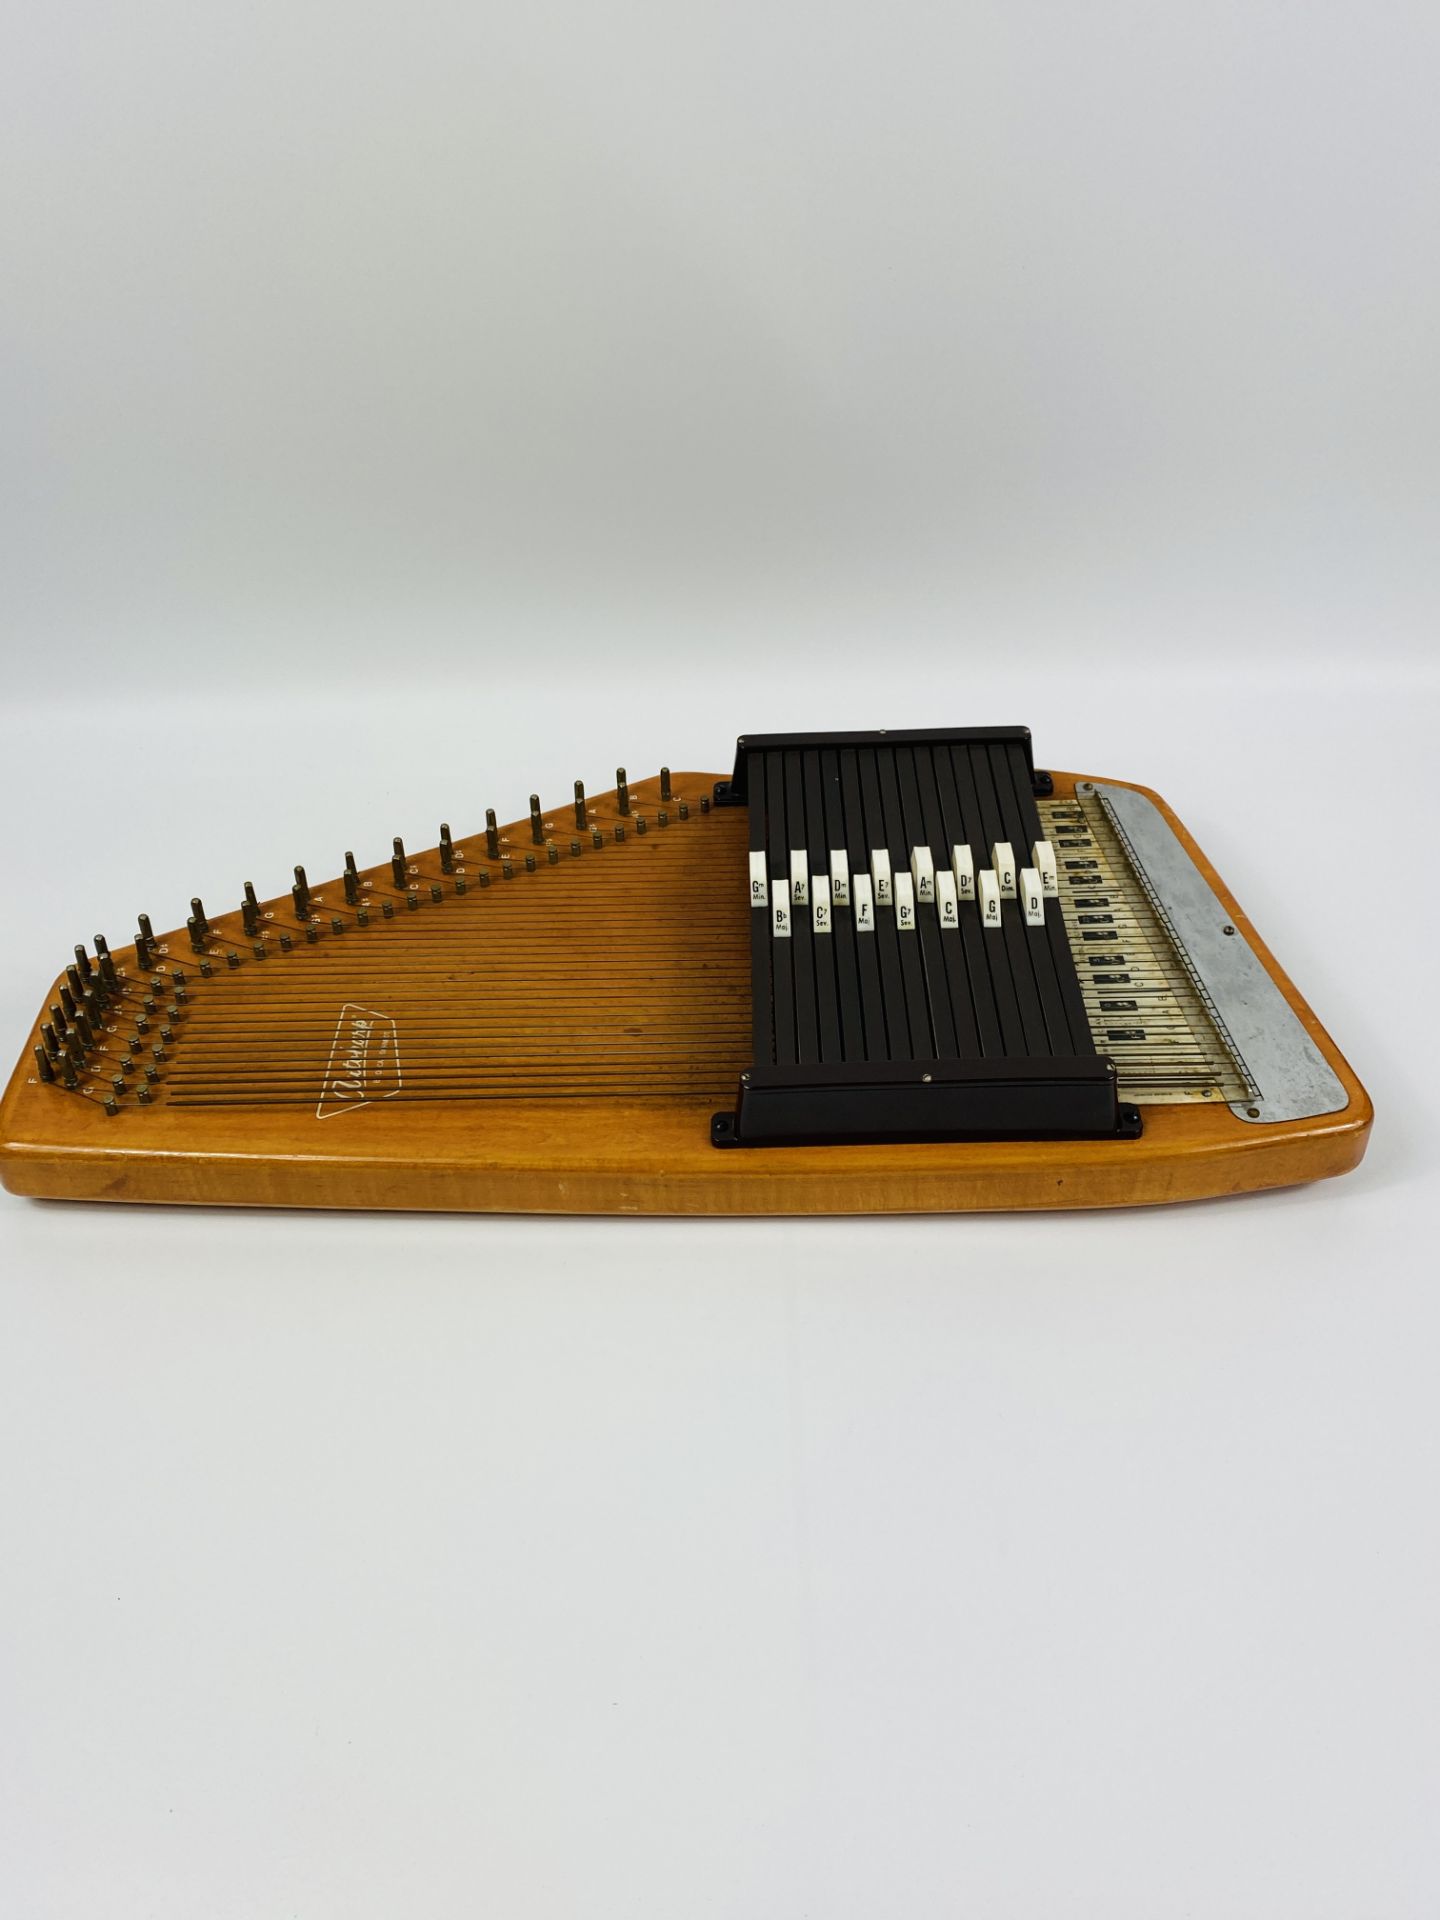 Autoharp in carry case - Image 4 of 7